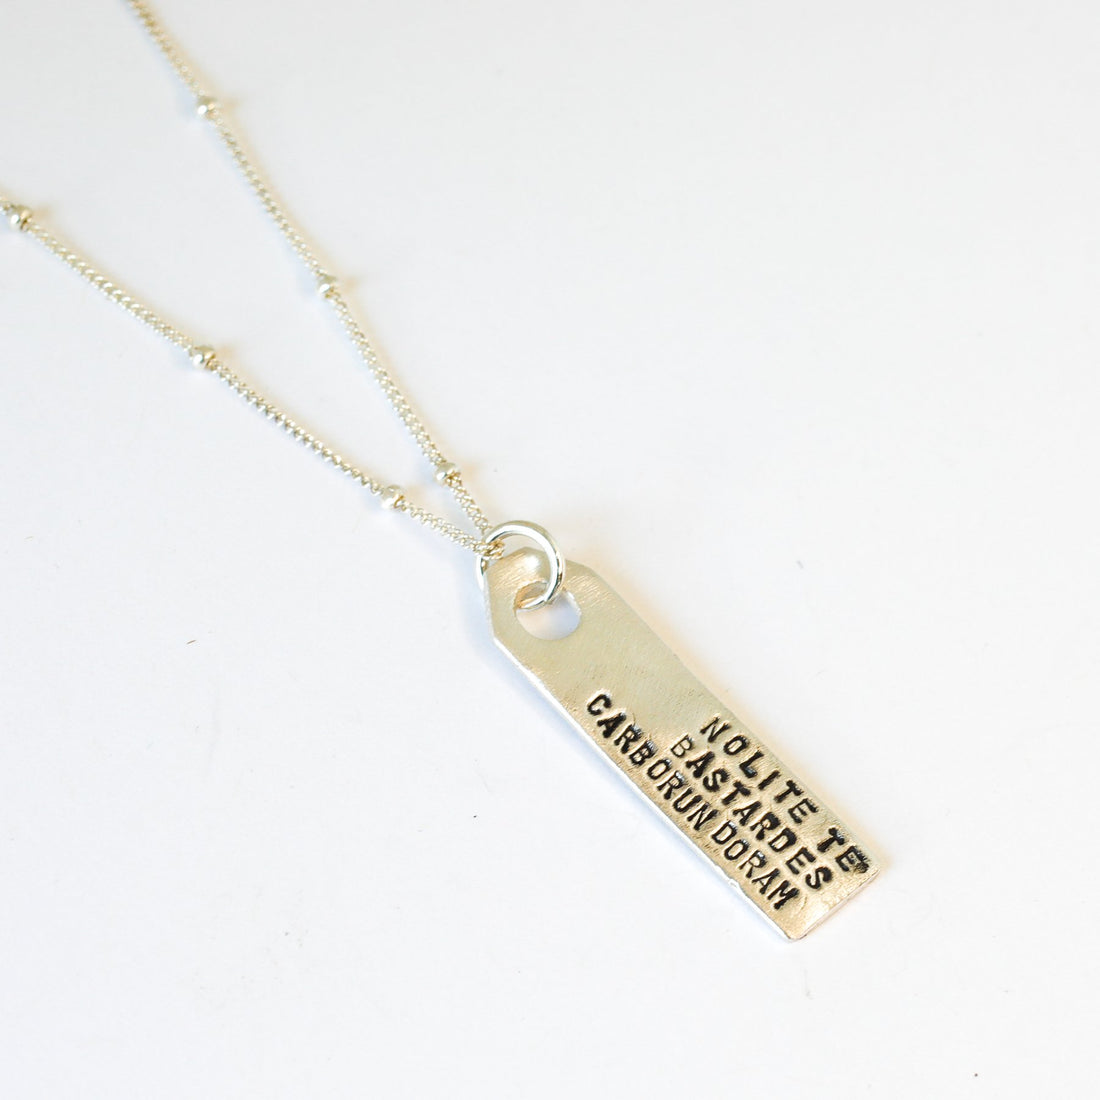 "Bastardes" Luggage Tag Quote Necklace - Chocolate and Steel